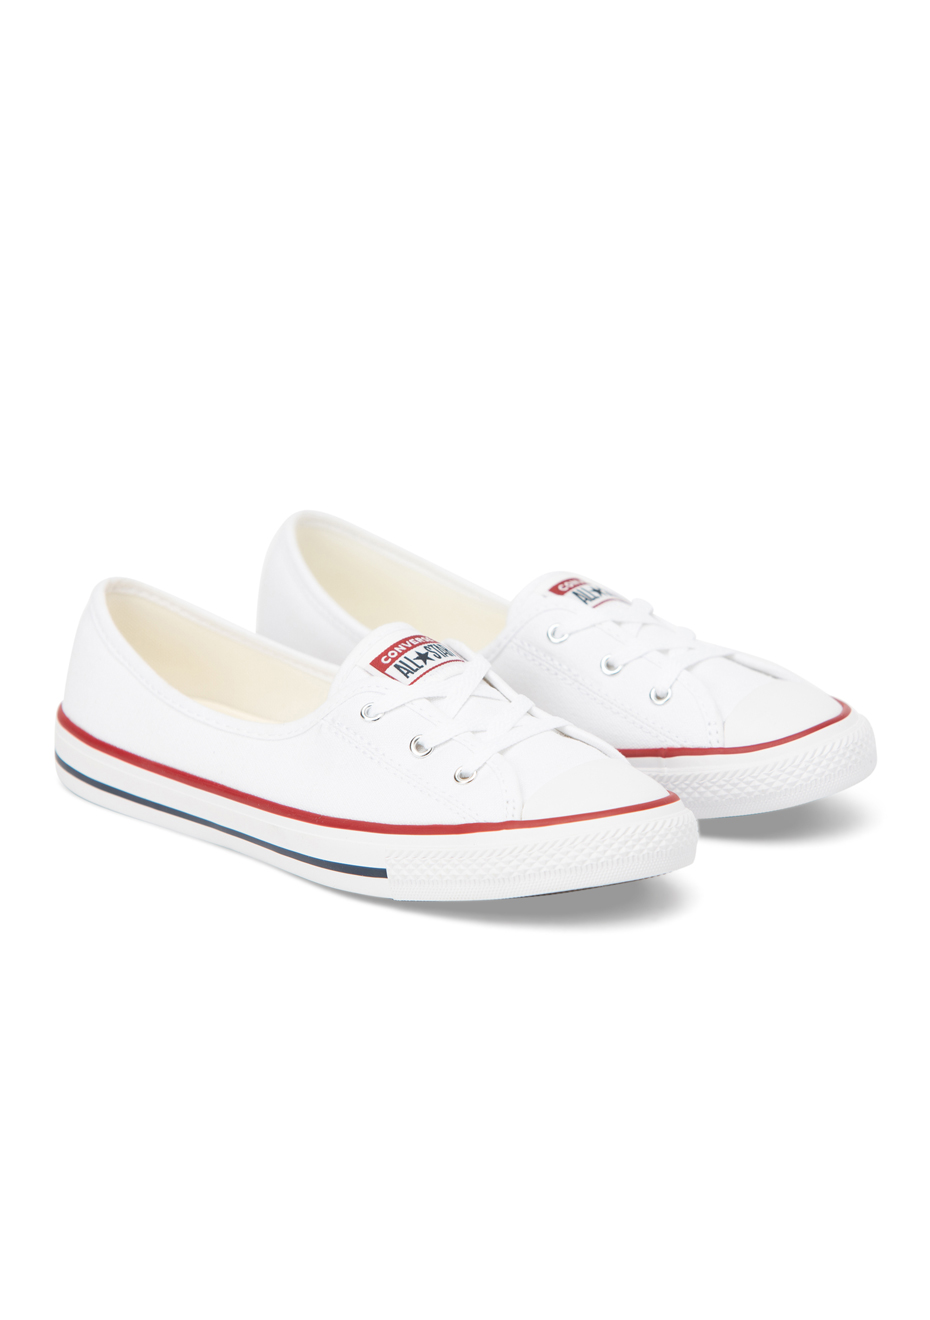 chuck taylor all star dainty ballet lace